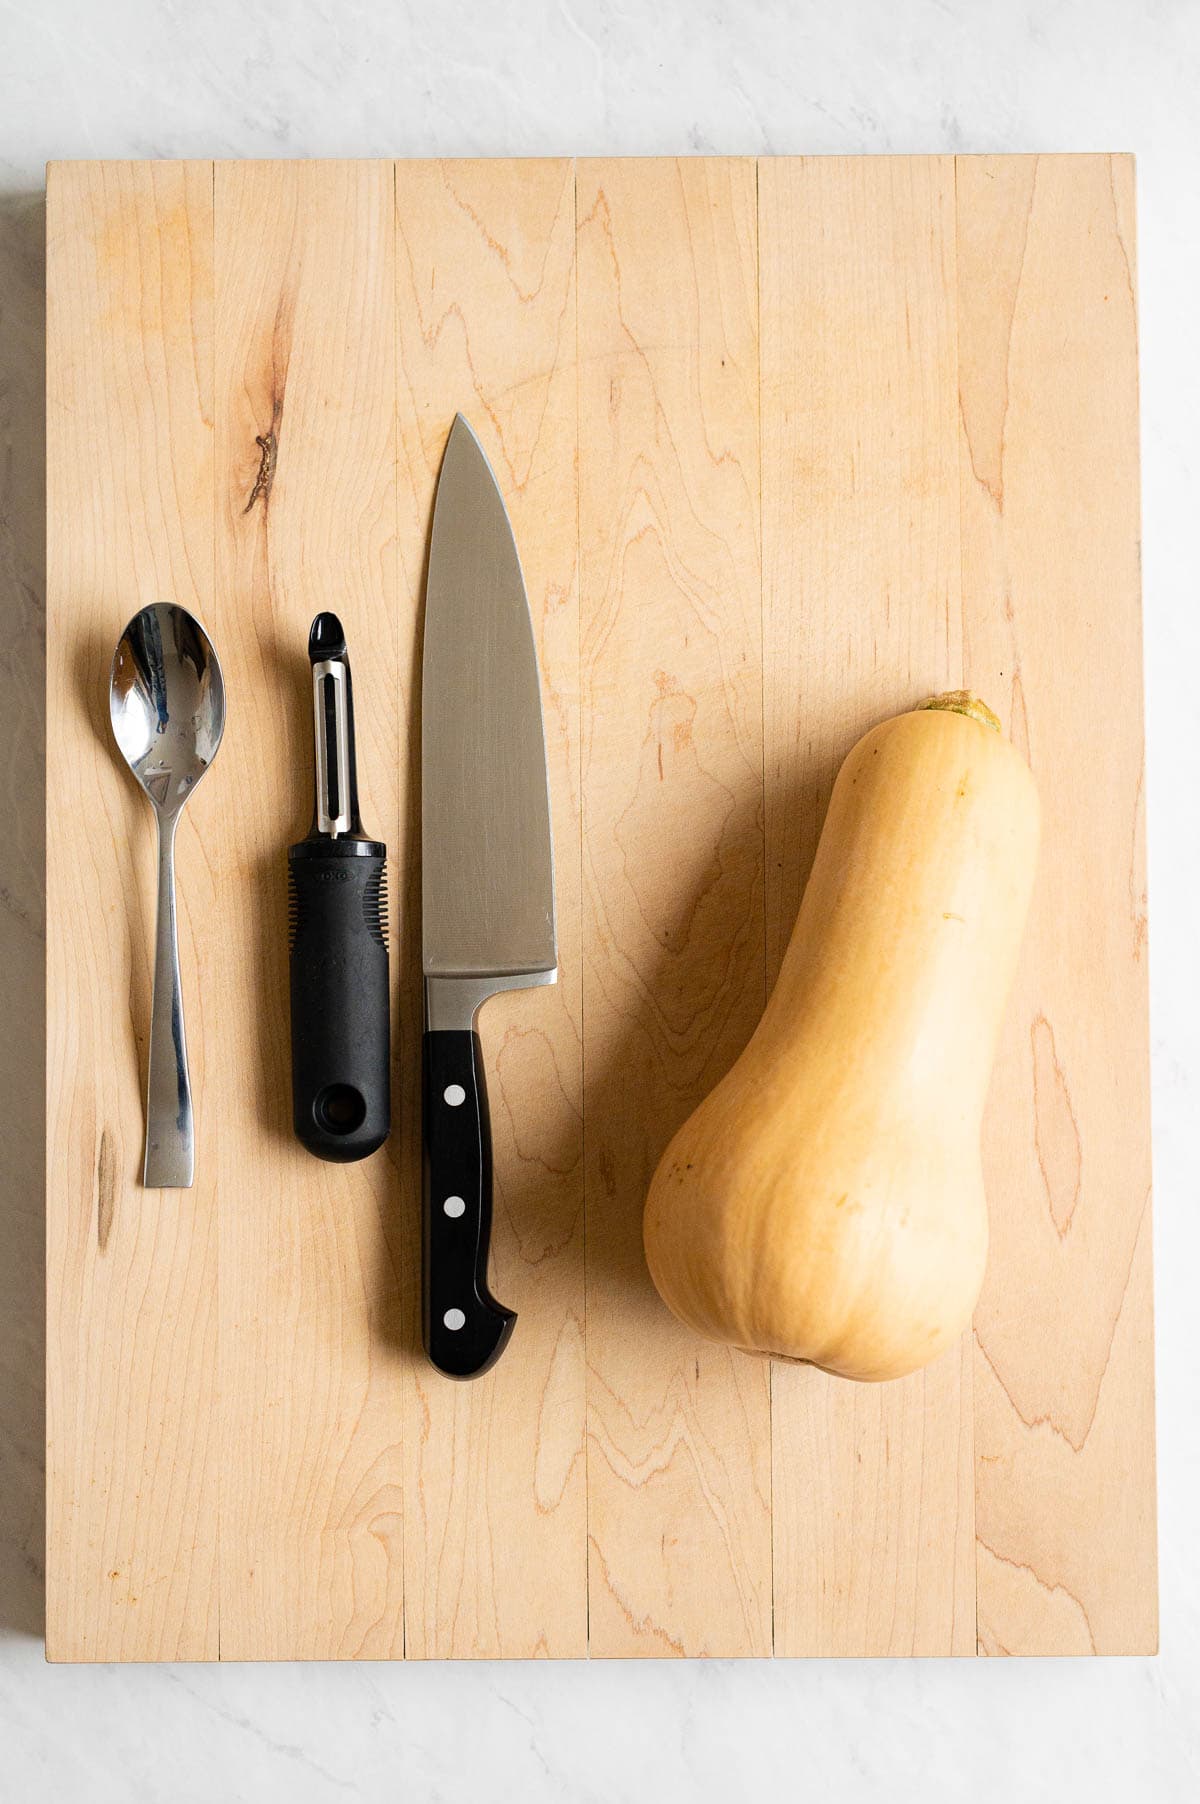 Butternut squash, chef's knife, vegetable peeler, tablespoon on large wooden cutting board.